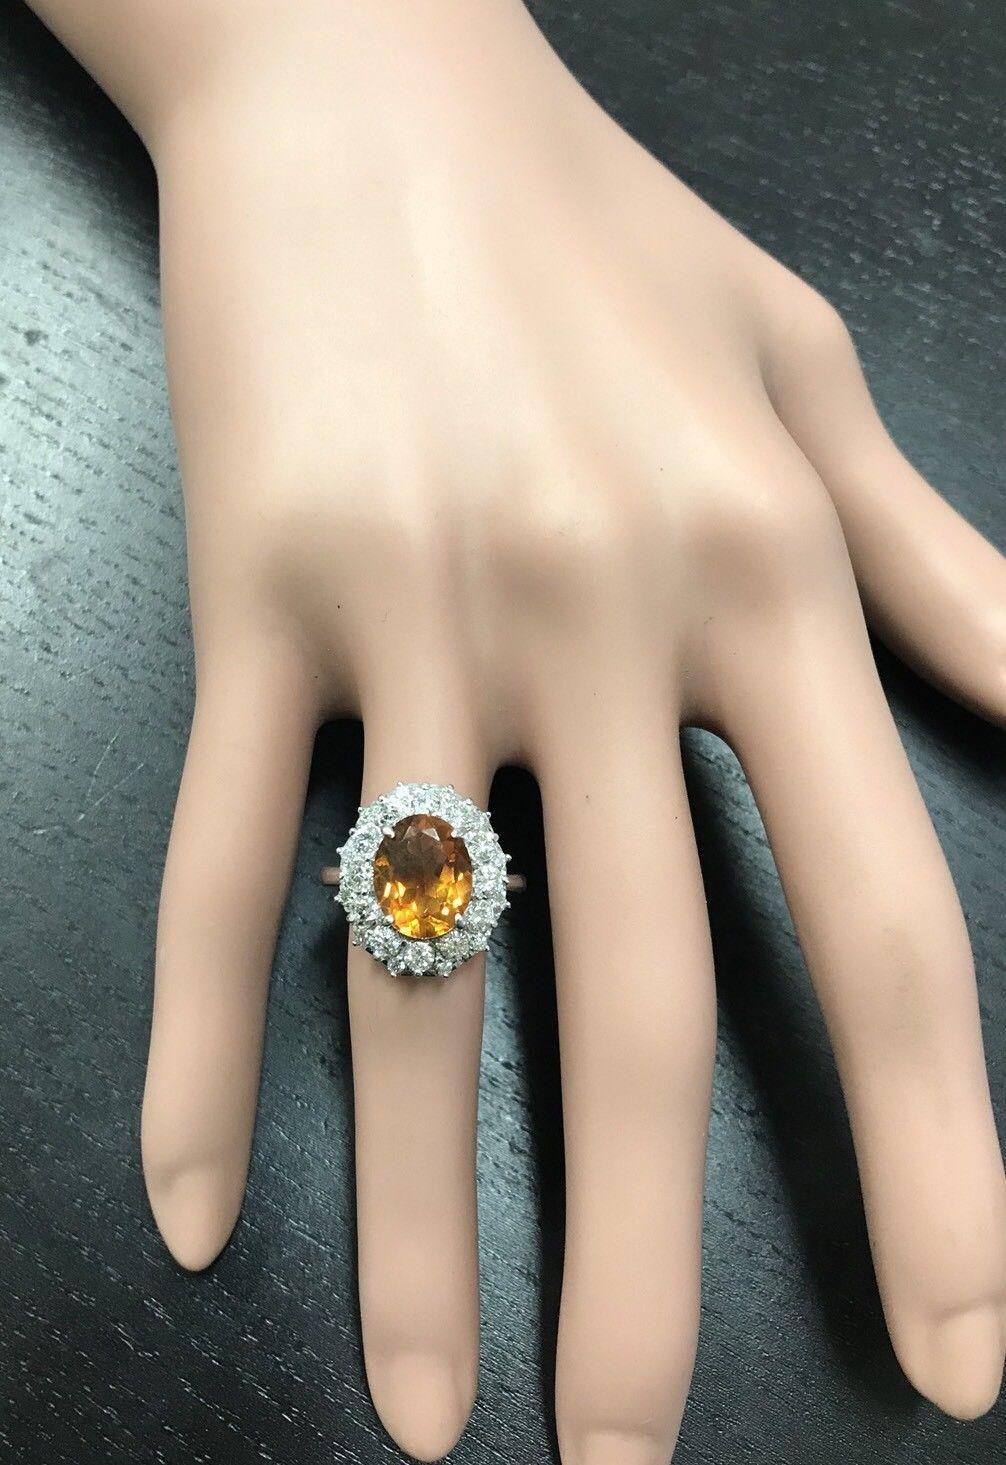 4.75 Carats Exquisite Natural Madeira Citrine and Diamond 14K Solid White Gold Ring



Total Natural Citrine Weight is: Approx. 3.50 Carats
Citrine Measures: Approx. 11.00 x 9.00mm

Natural Round Diamonds Weight: Approx. 1.25 Carats (color G-H /